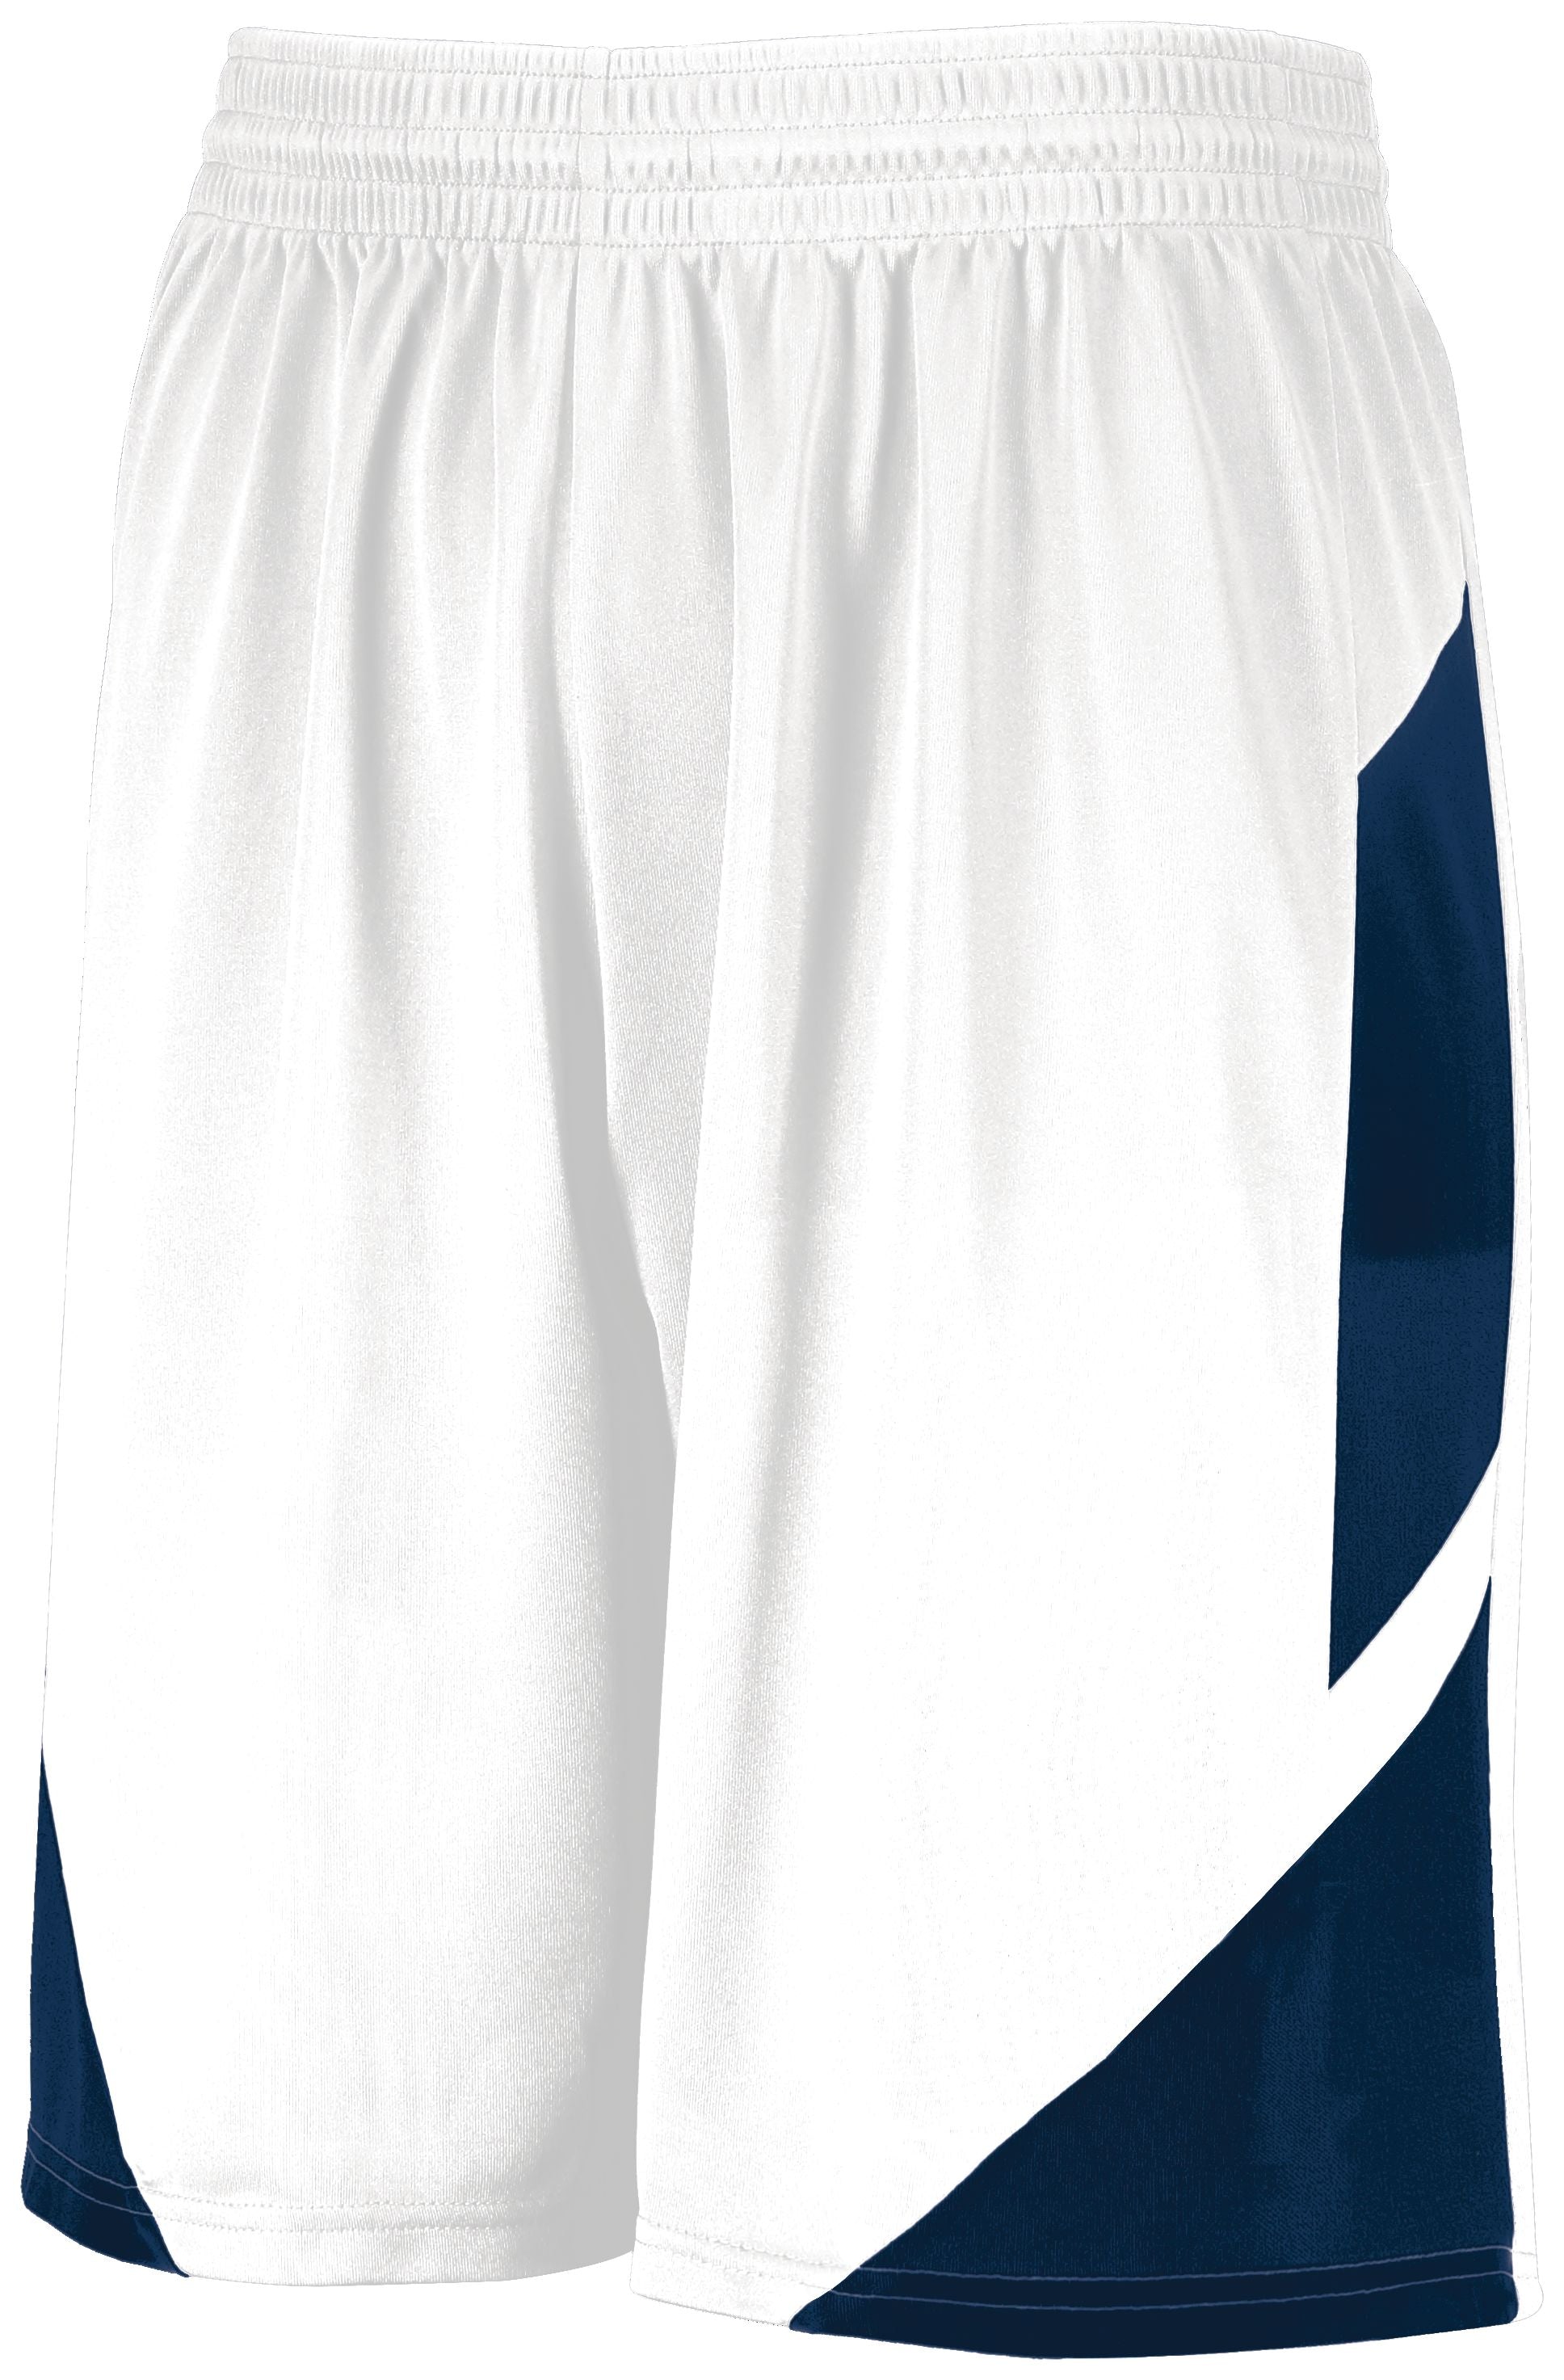 Augusta Sportswear Step-Back Basketball Shorts in White/Navy  -Part of the Adult, Adult-Shorts, Augusta-Products, Basketball, All-Sports, All-Sports-1 product lines at KanaleyCreations.com